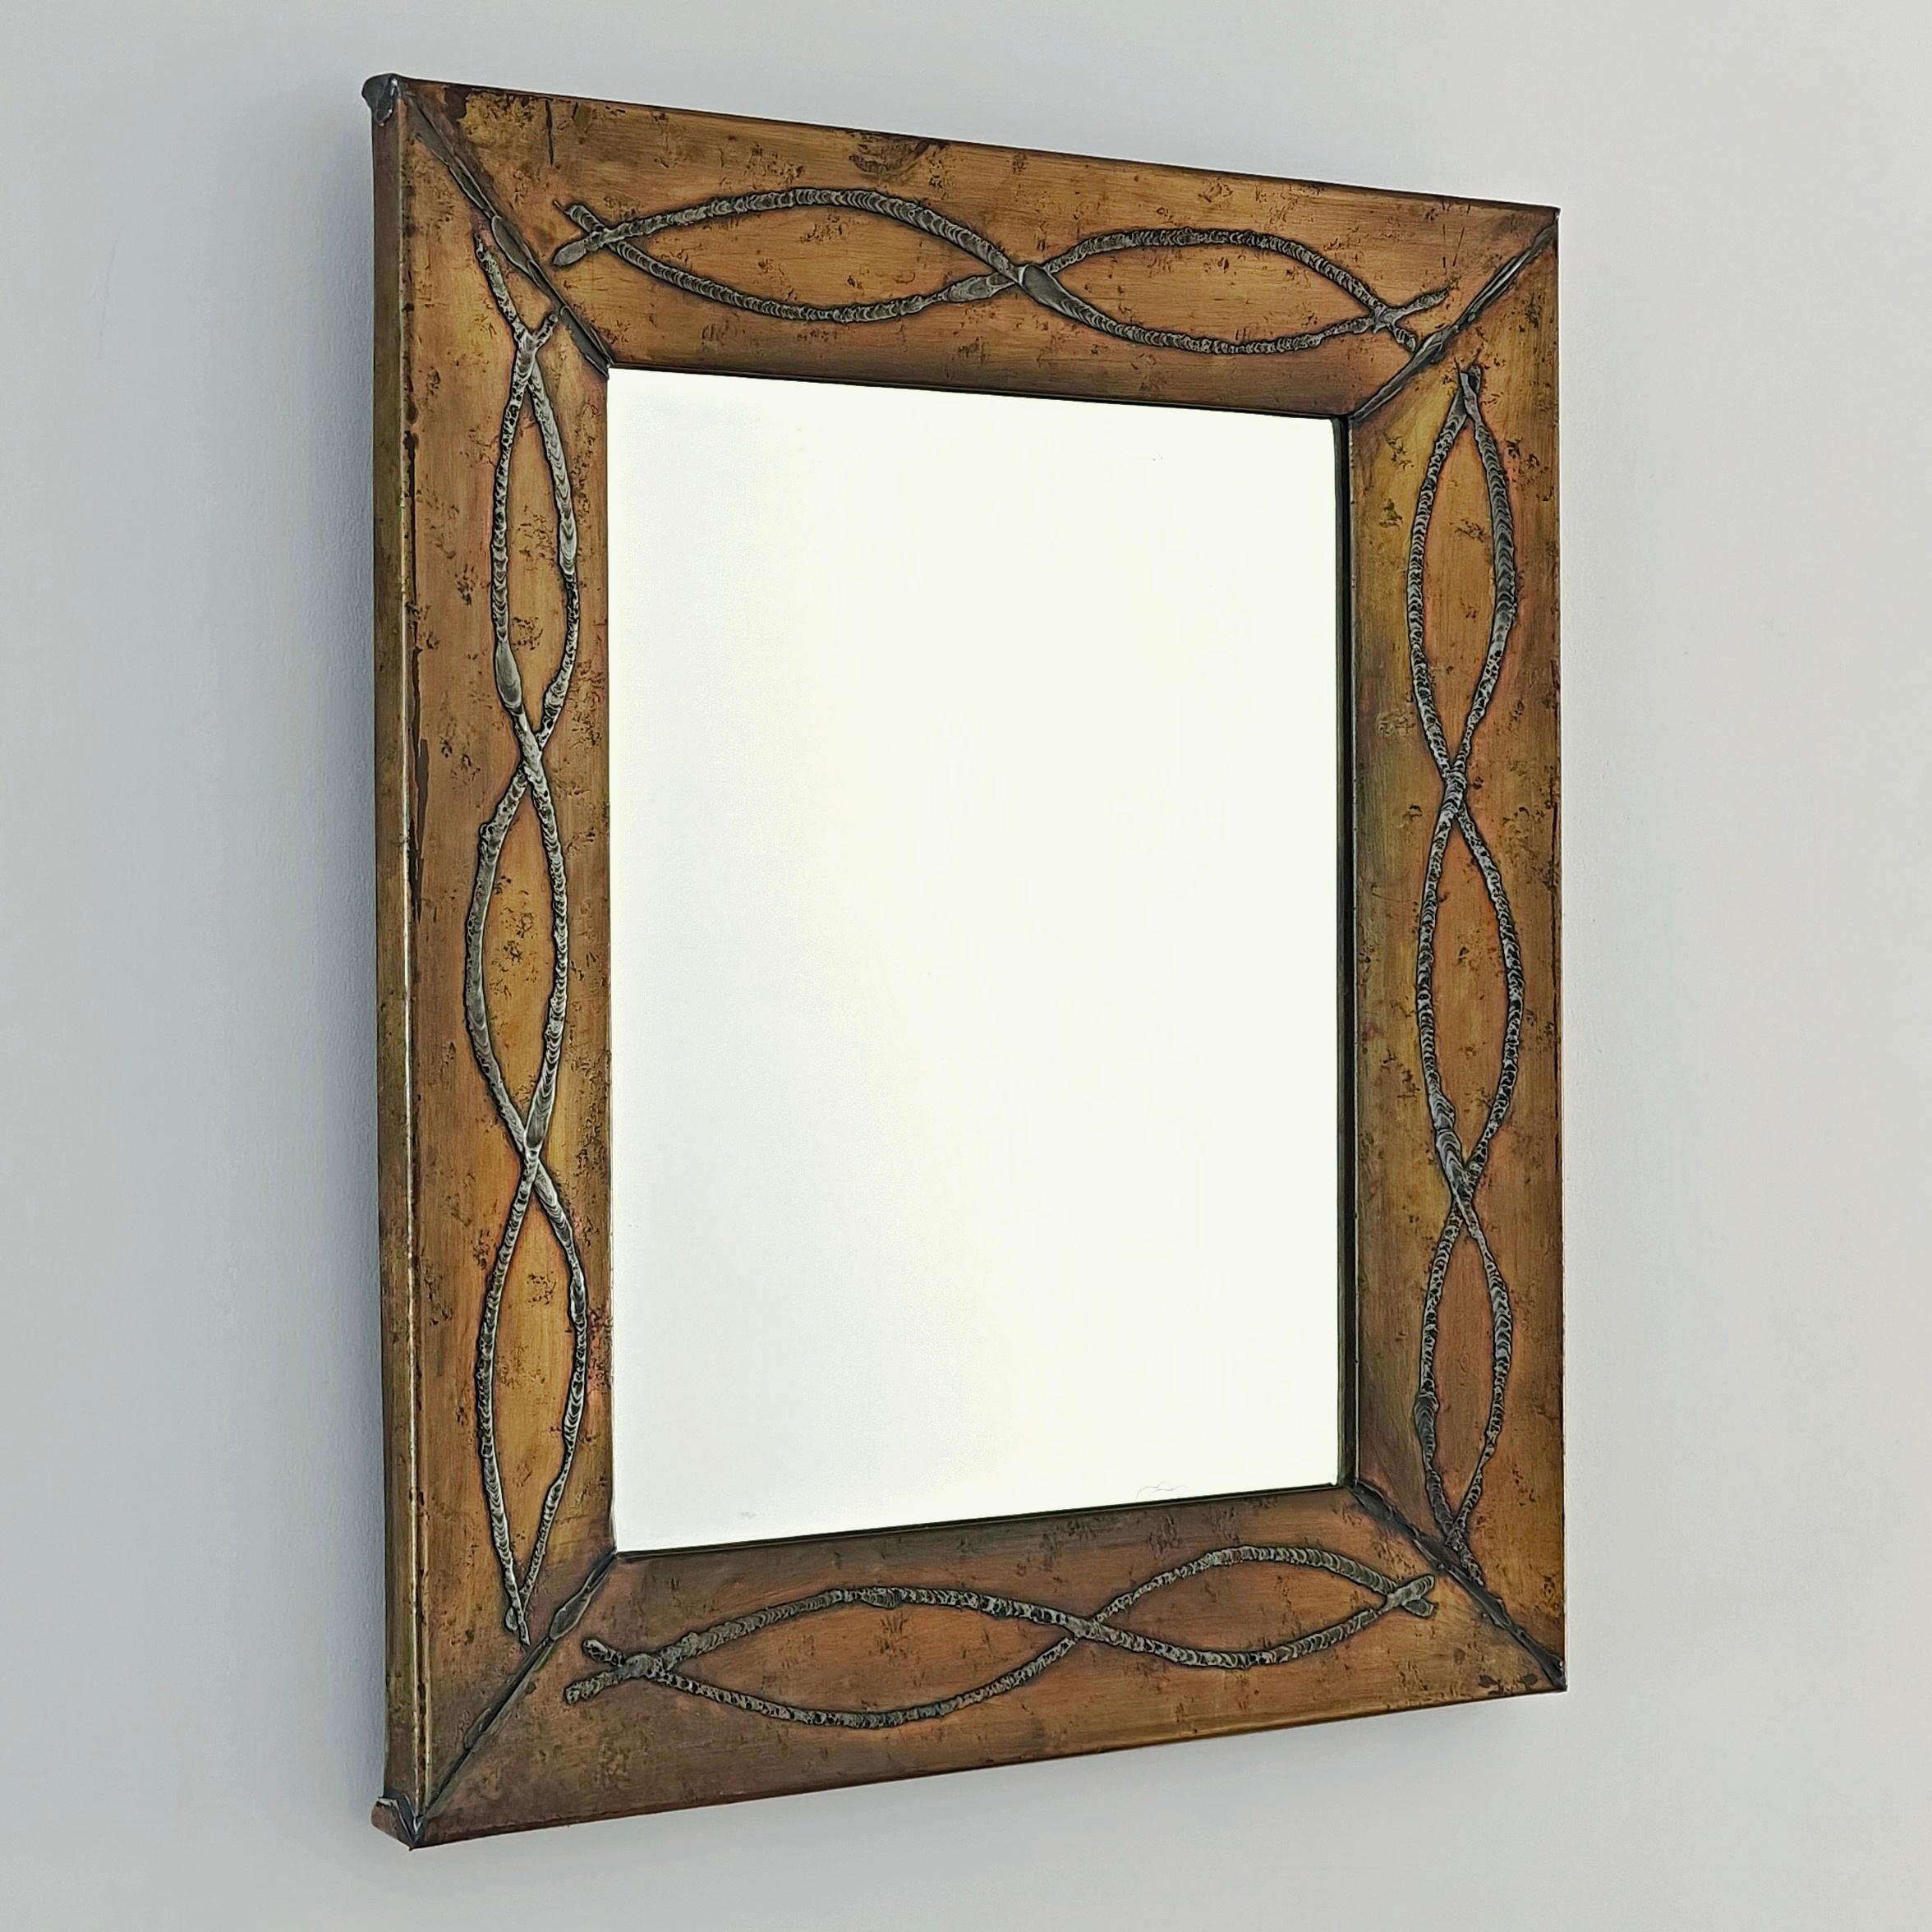 Mirror by the French tin and brass artisan Jean Goardère (20th century), produced in the town of Orthez in the Pyrénées Atlantiques region. This mirror features an abstract decoration that can be interpreted as fish. The frame’s decoration is made